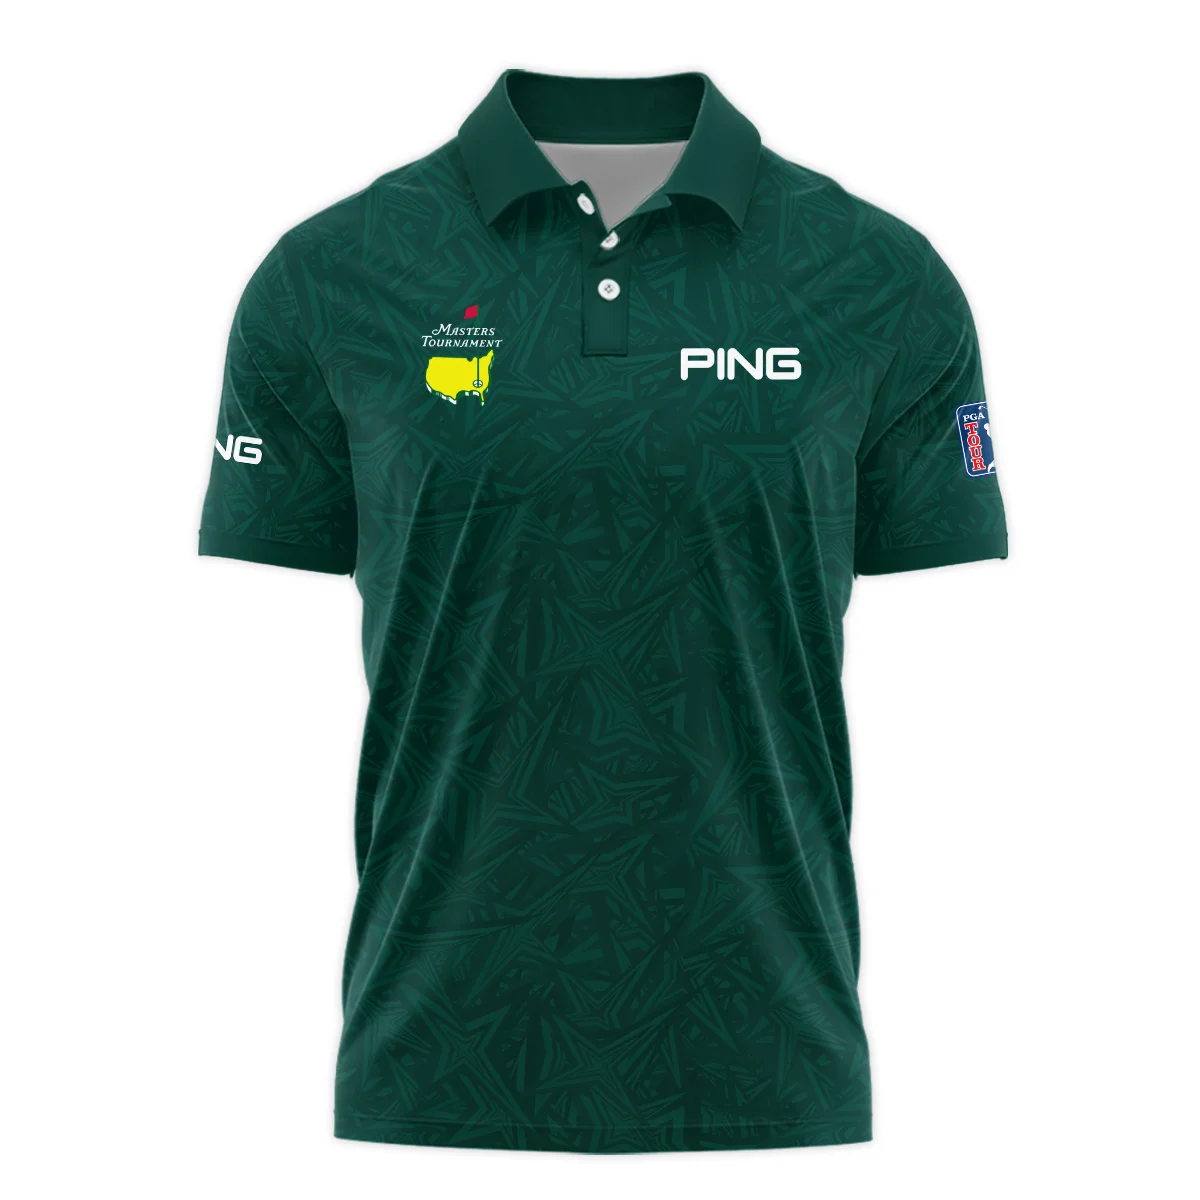 Stars Dark Green Abstract Sport Masters Tournament Ping Long Polo Shirt Style Classic Long Polo Shirt For Men